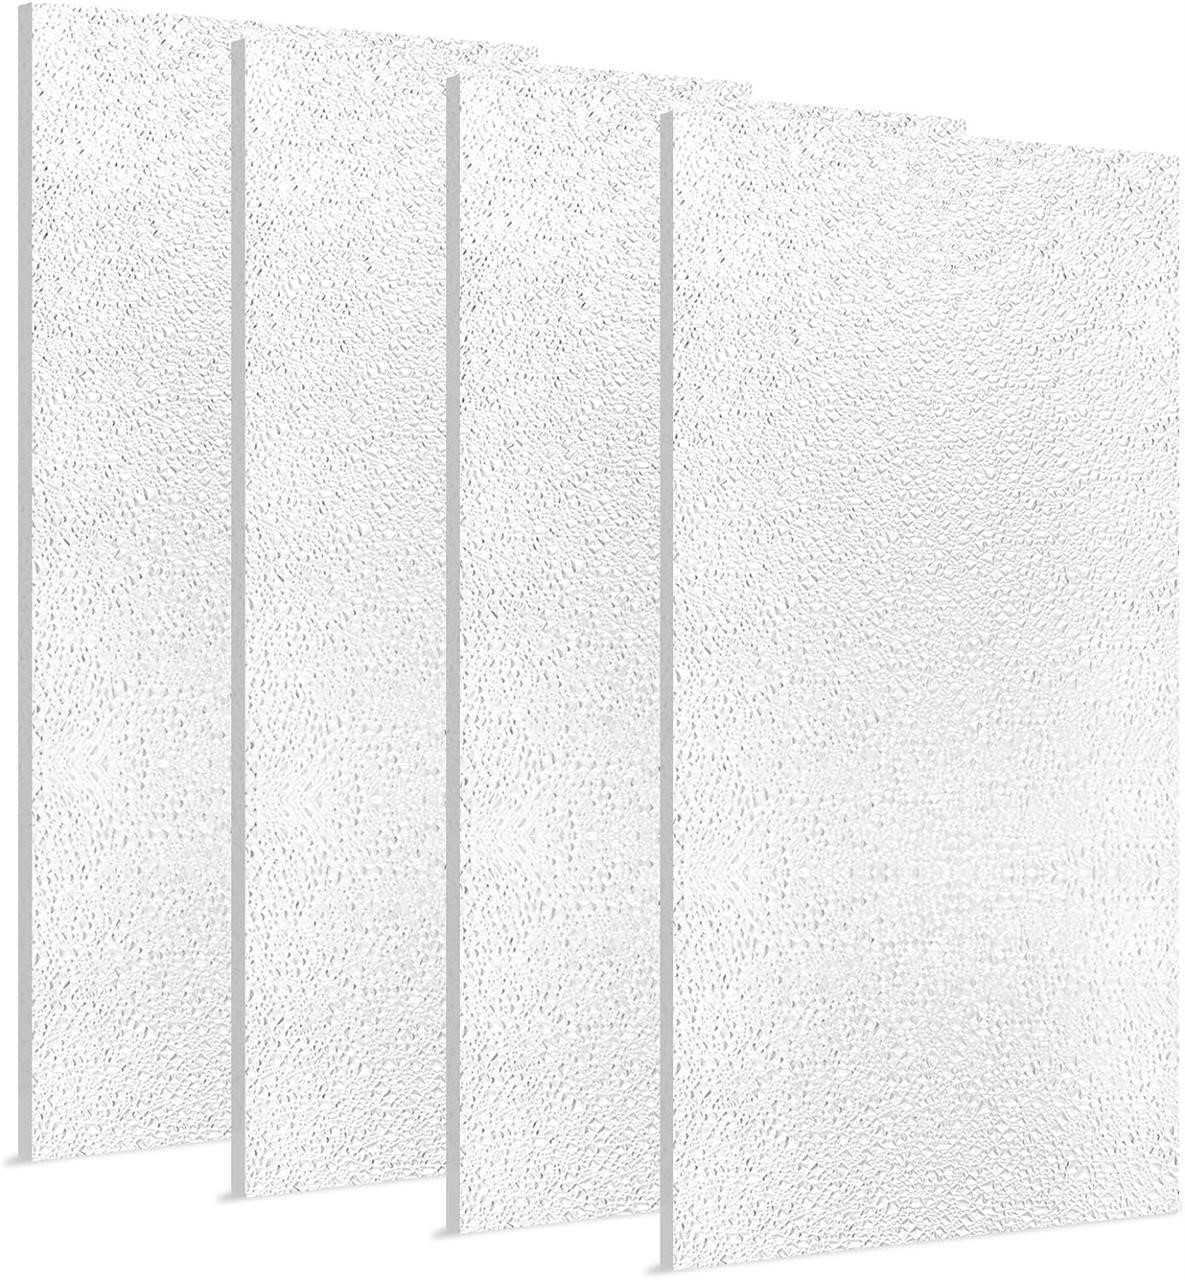 4 Pack Light Panels  Clear  22.5x46.5 In